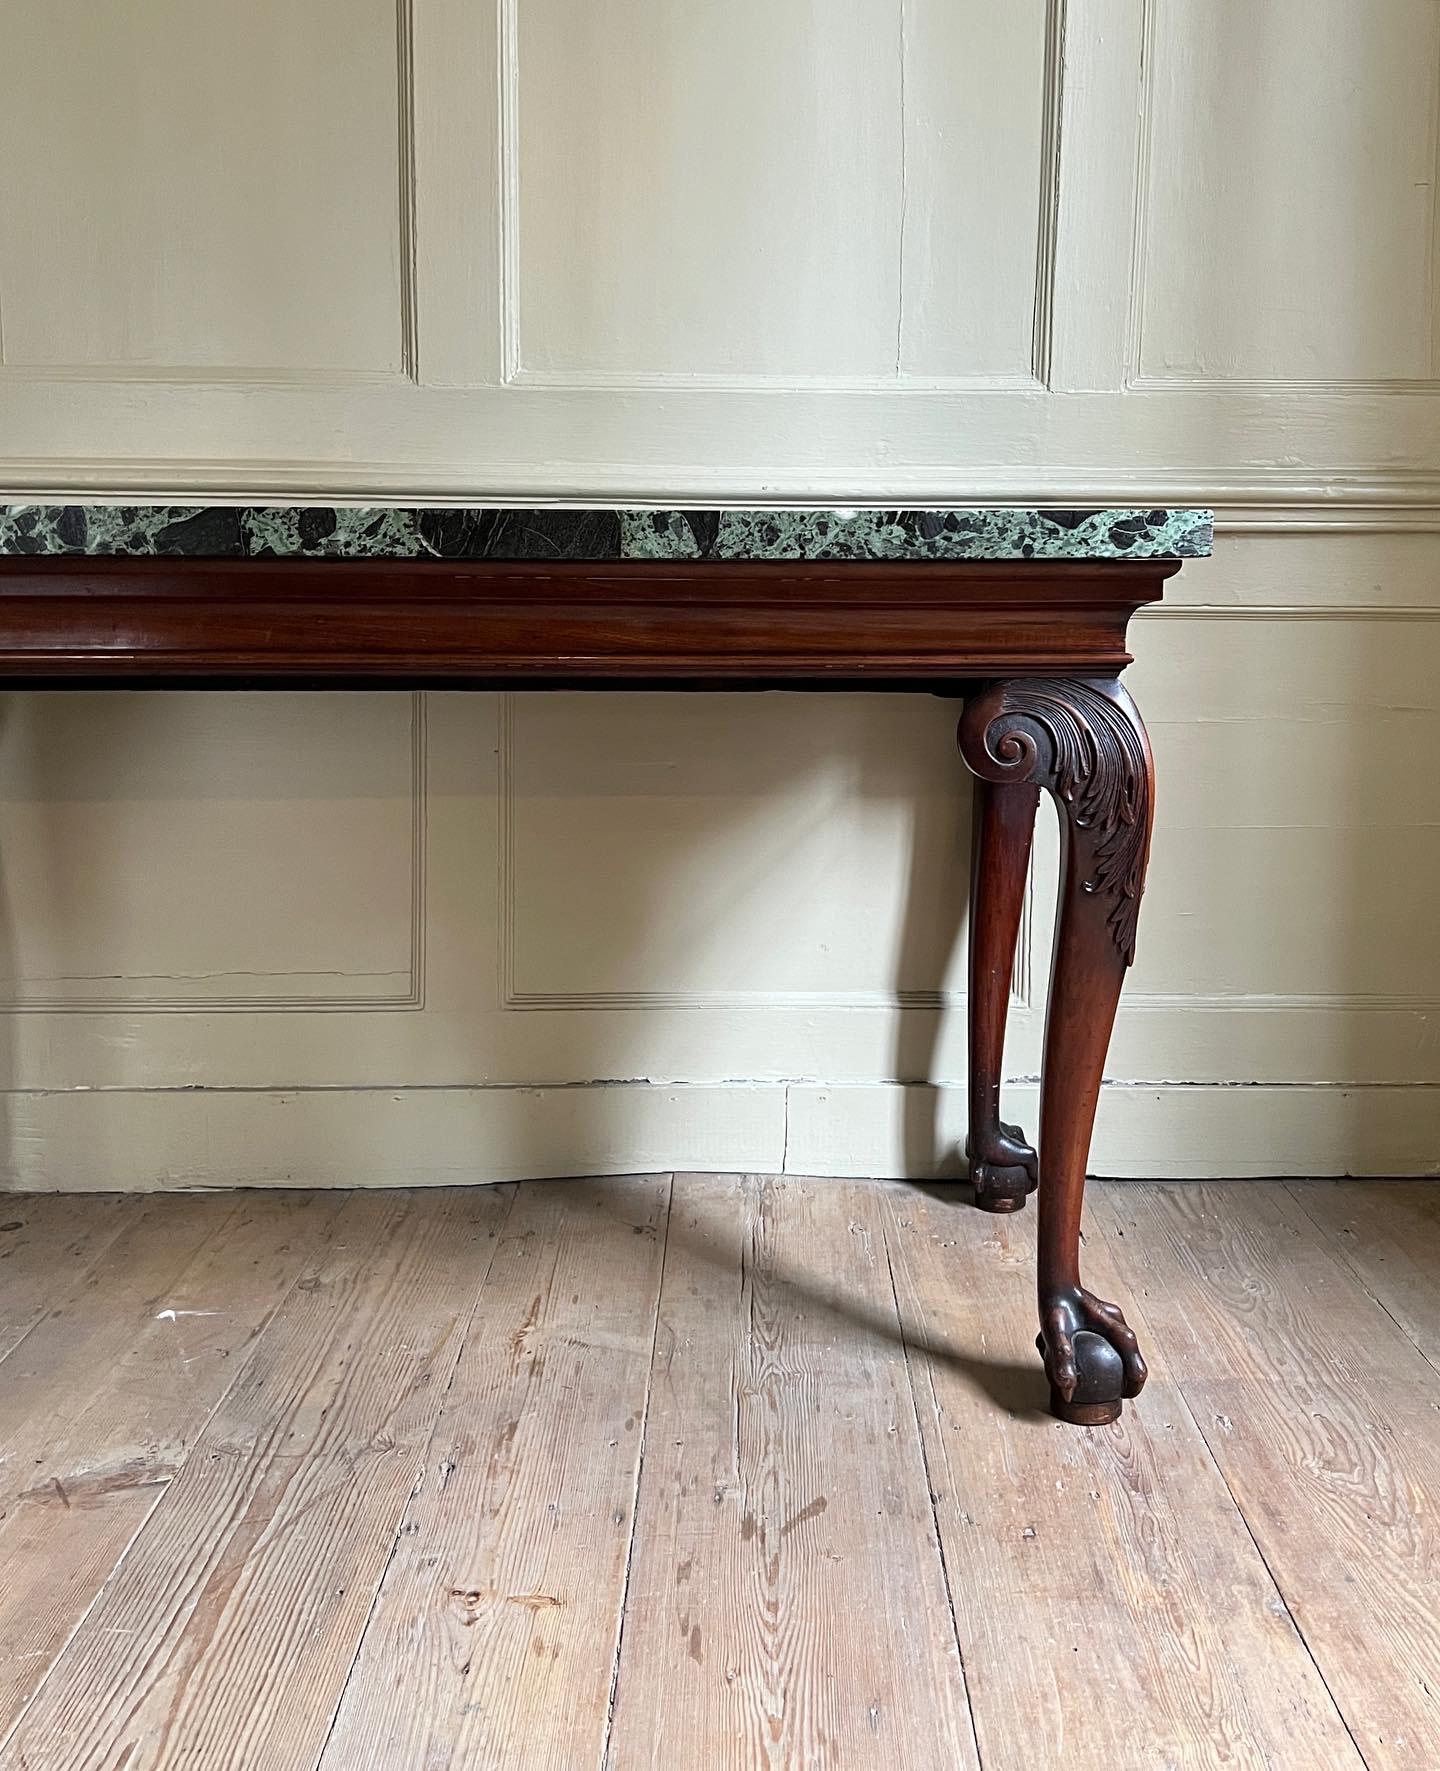 A fine George II period serving table of architectural design and strong proportions. English, c.1740. The four cabriole legs are finely carved with acanthus to the knees and are raised on bold ball & claw feet. The cavetto moulded frieze supports a